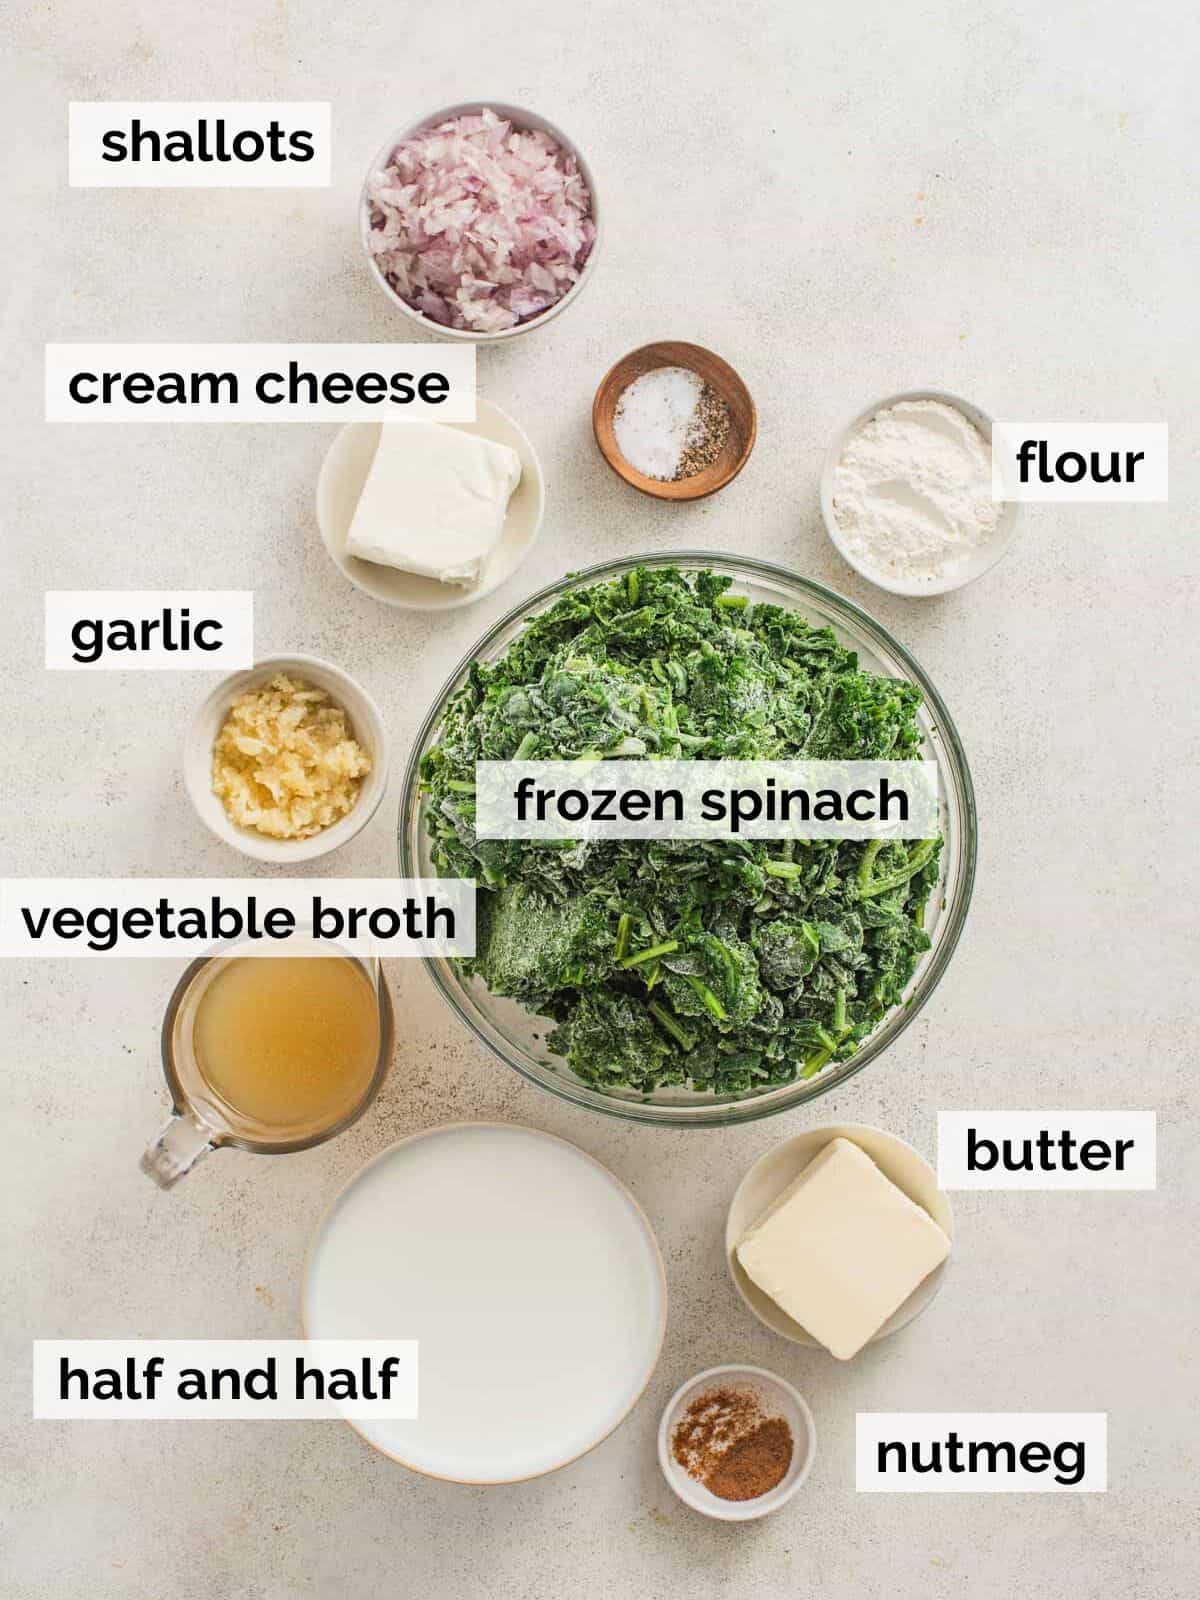 Ingredients for creamed spinach from frozen spinach.